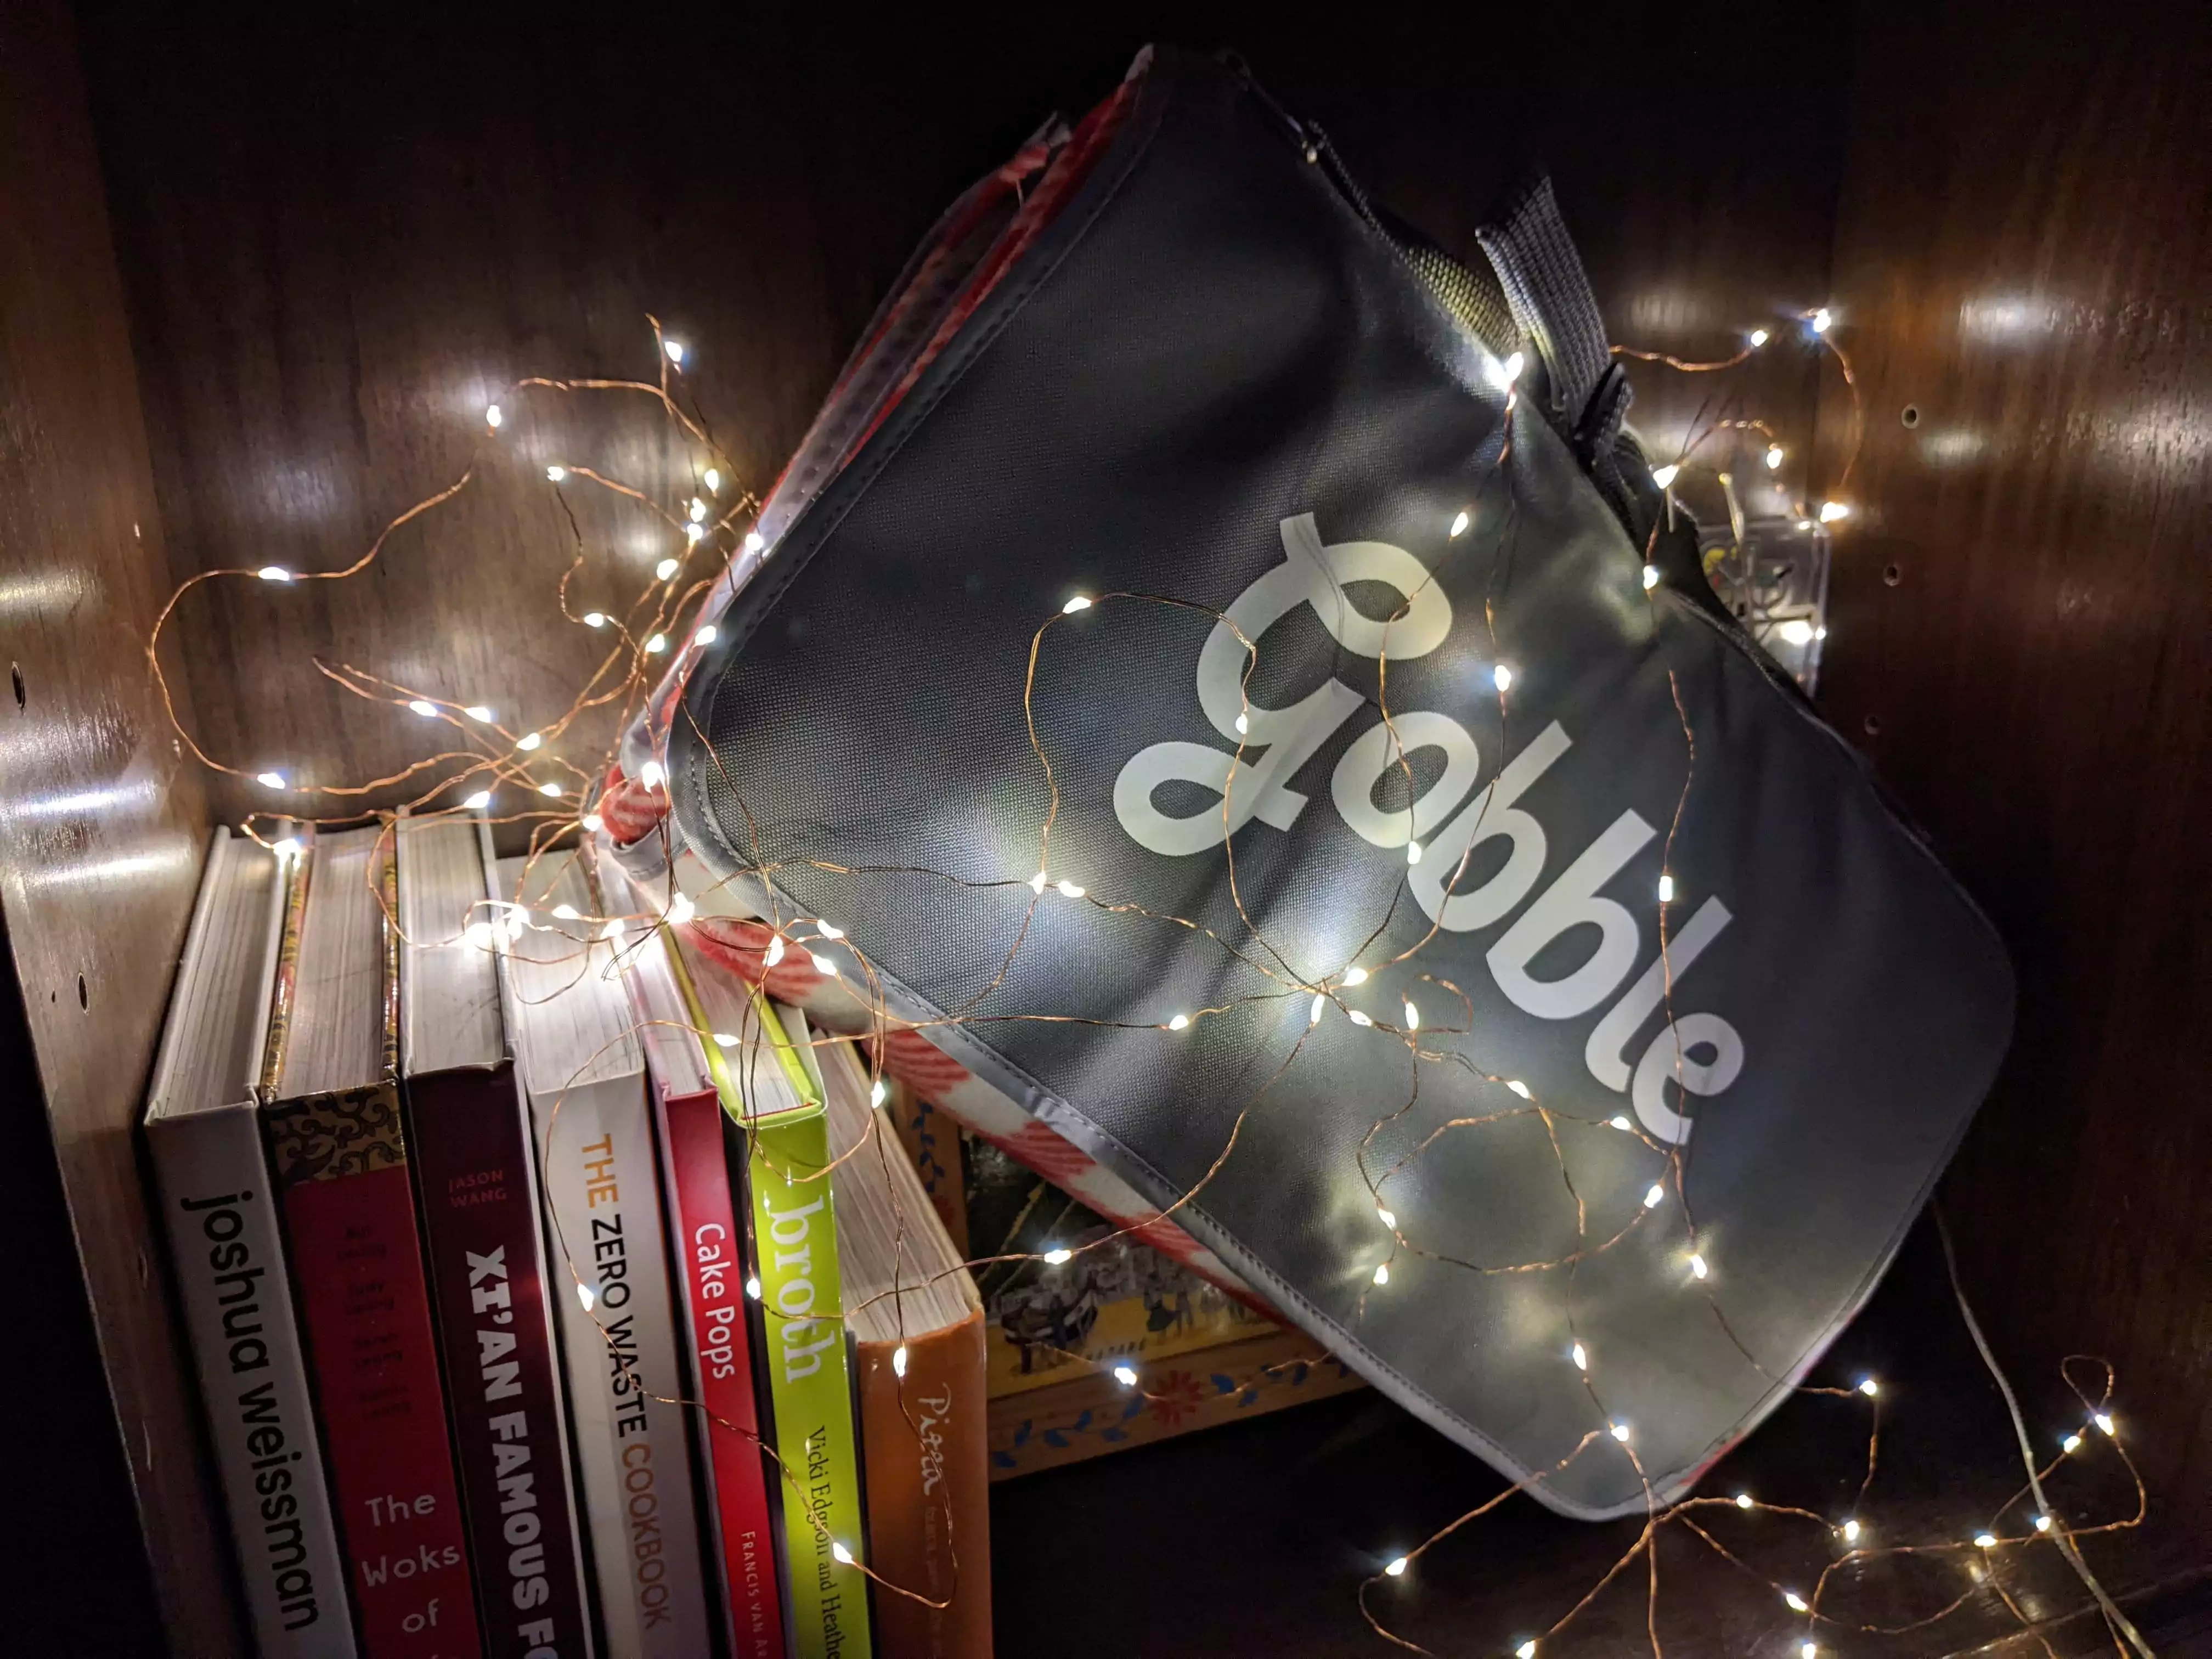 Folded up picnic blanket with the Gobble logo, sitting on cookbooks and covered in string lights